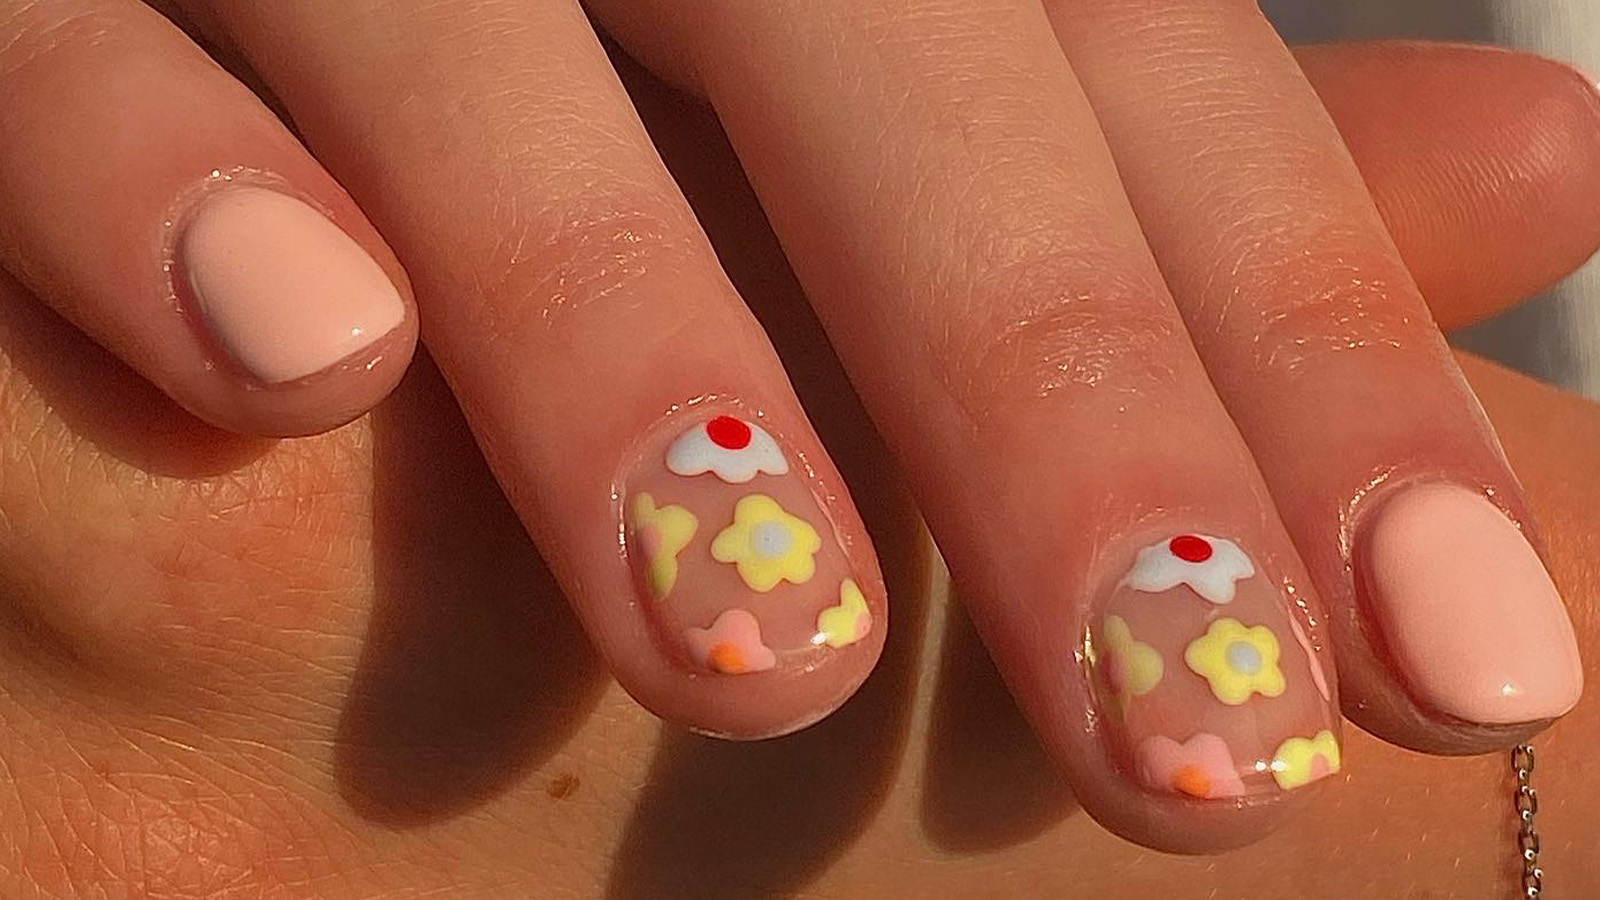 A Floral Nail Art Tutorial For Spring - Beauty Bay Edited